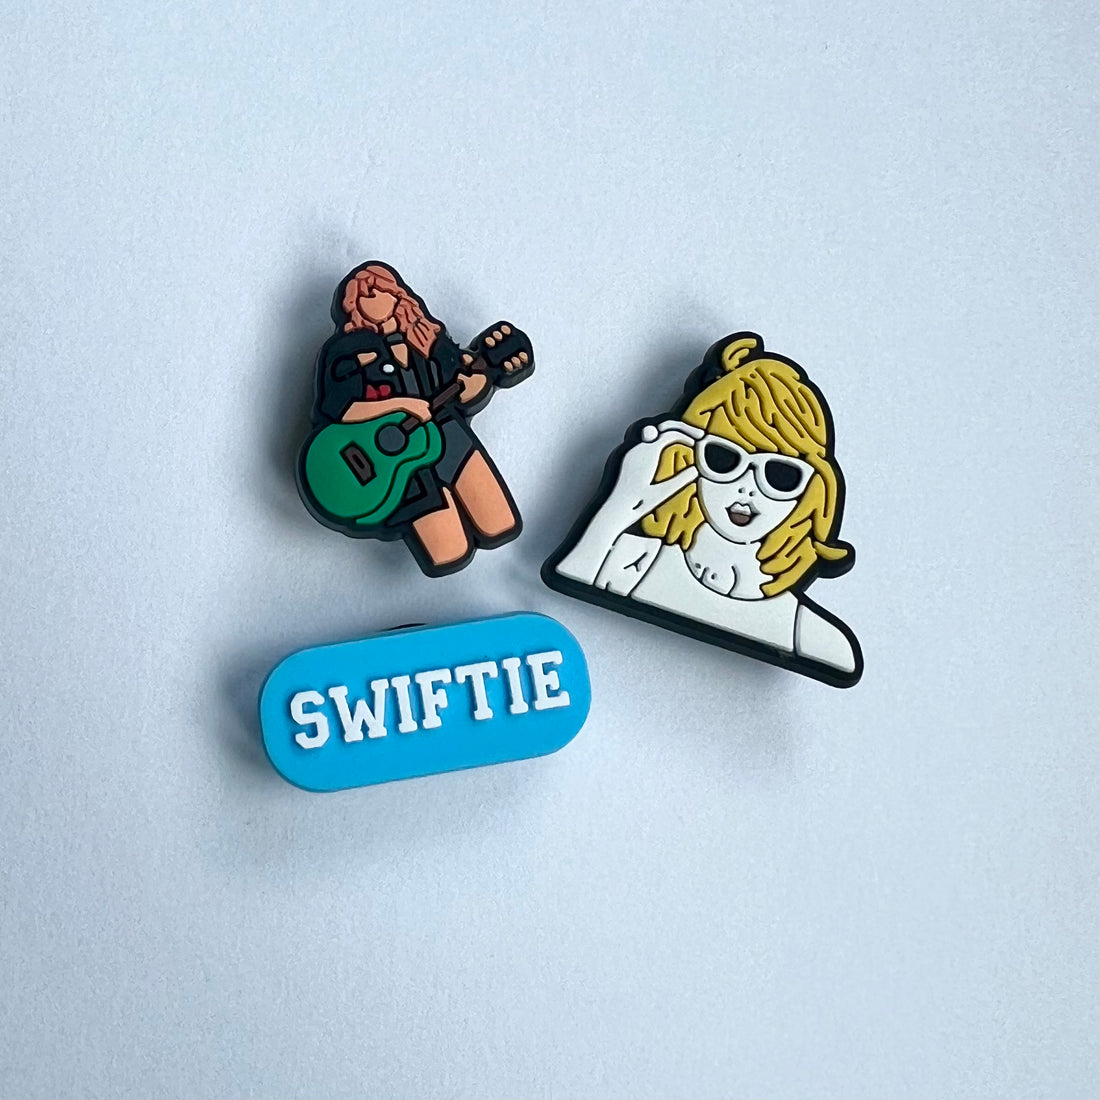 The Swiftie Charms Pack